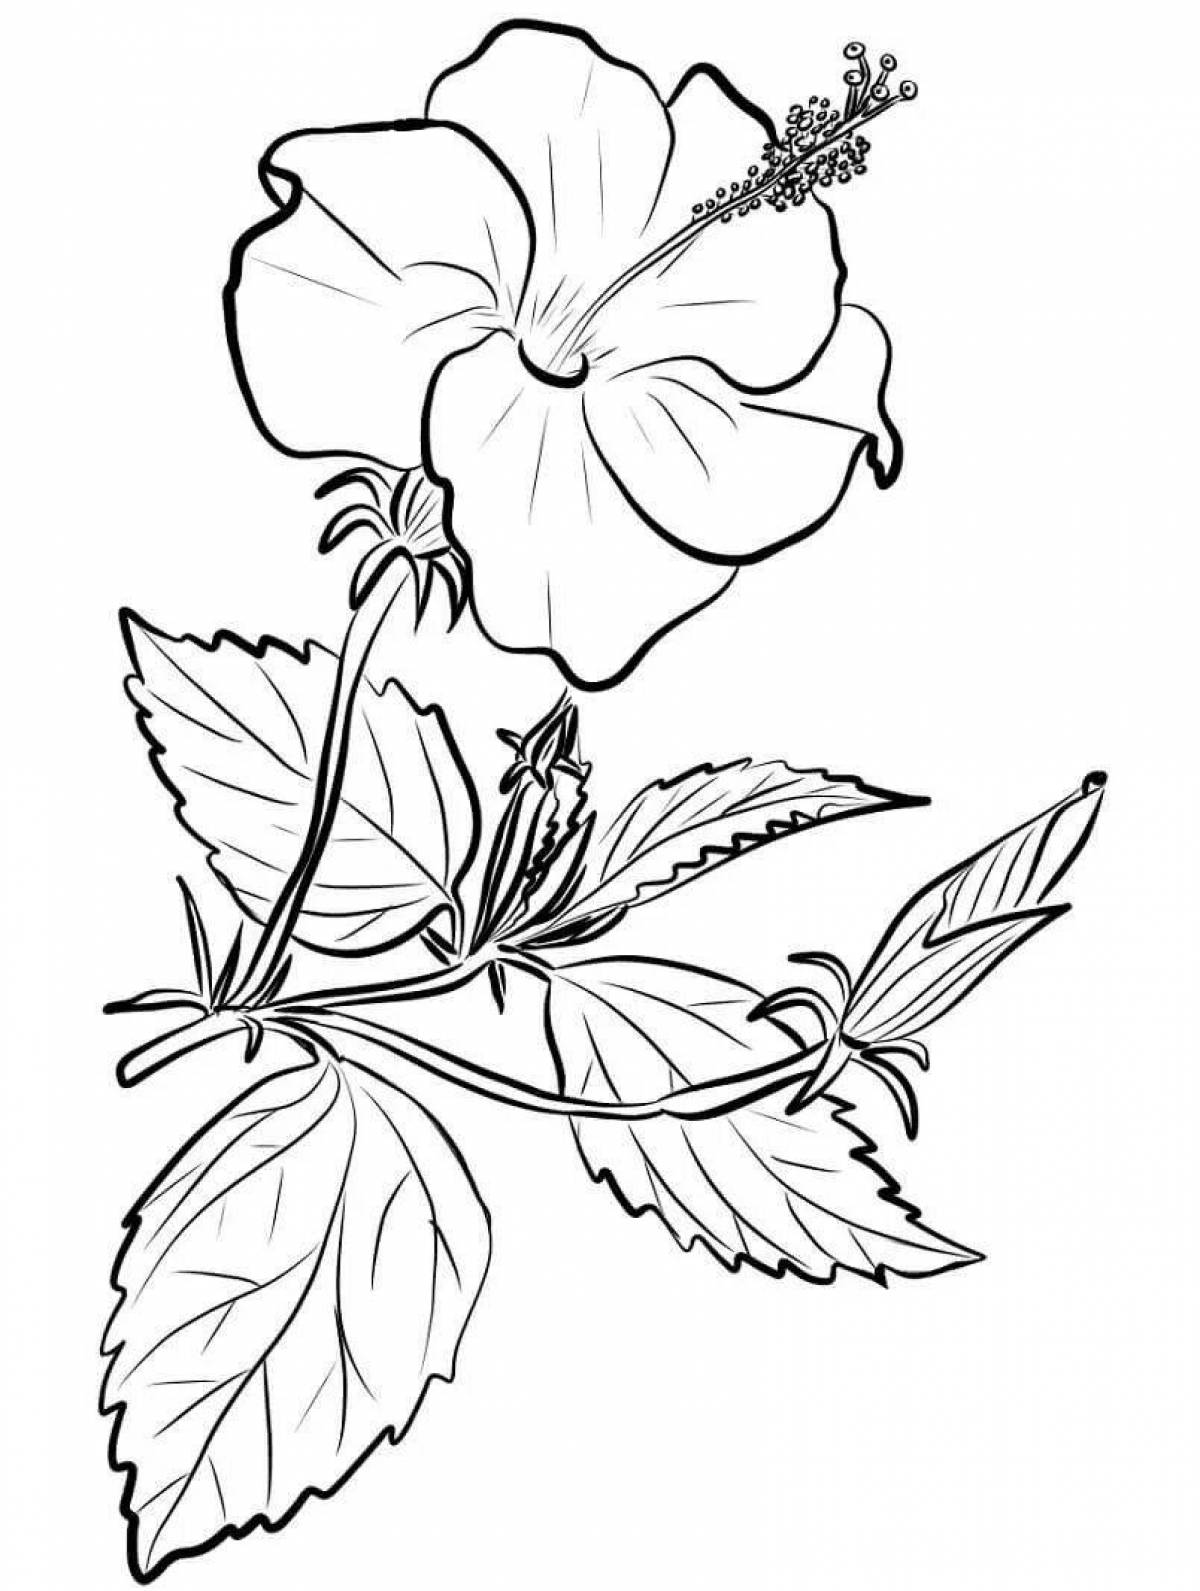 Tempting flower drawing coloring book